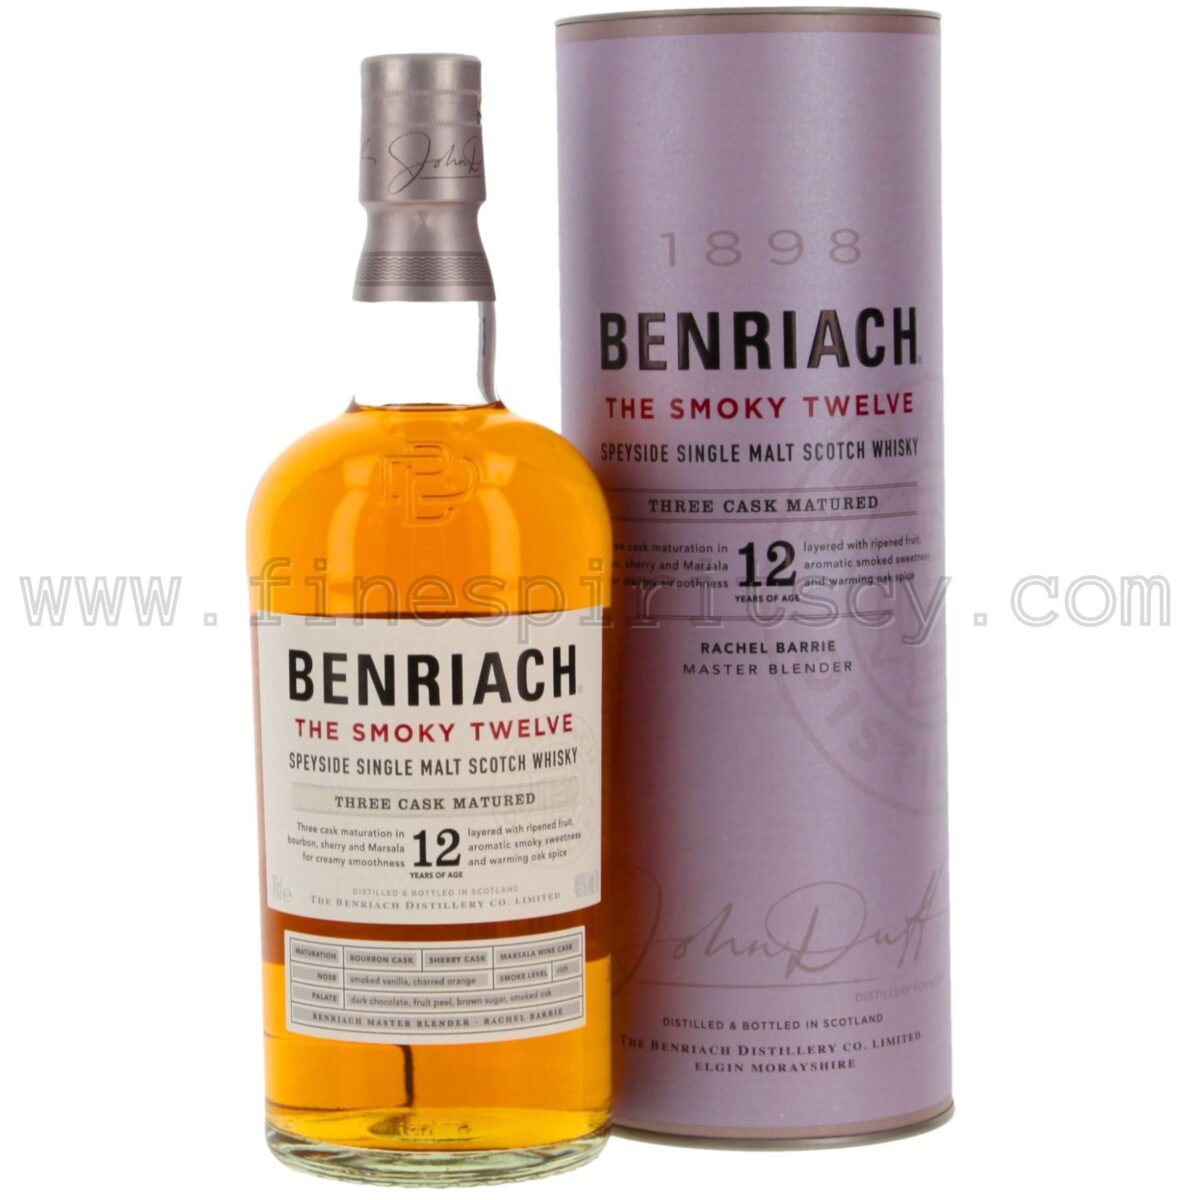 Benriach Smoky Twelve 12 Year Old Cyprus 70cl Shop 700ml 0.7L Whisky Price